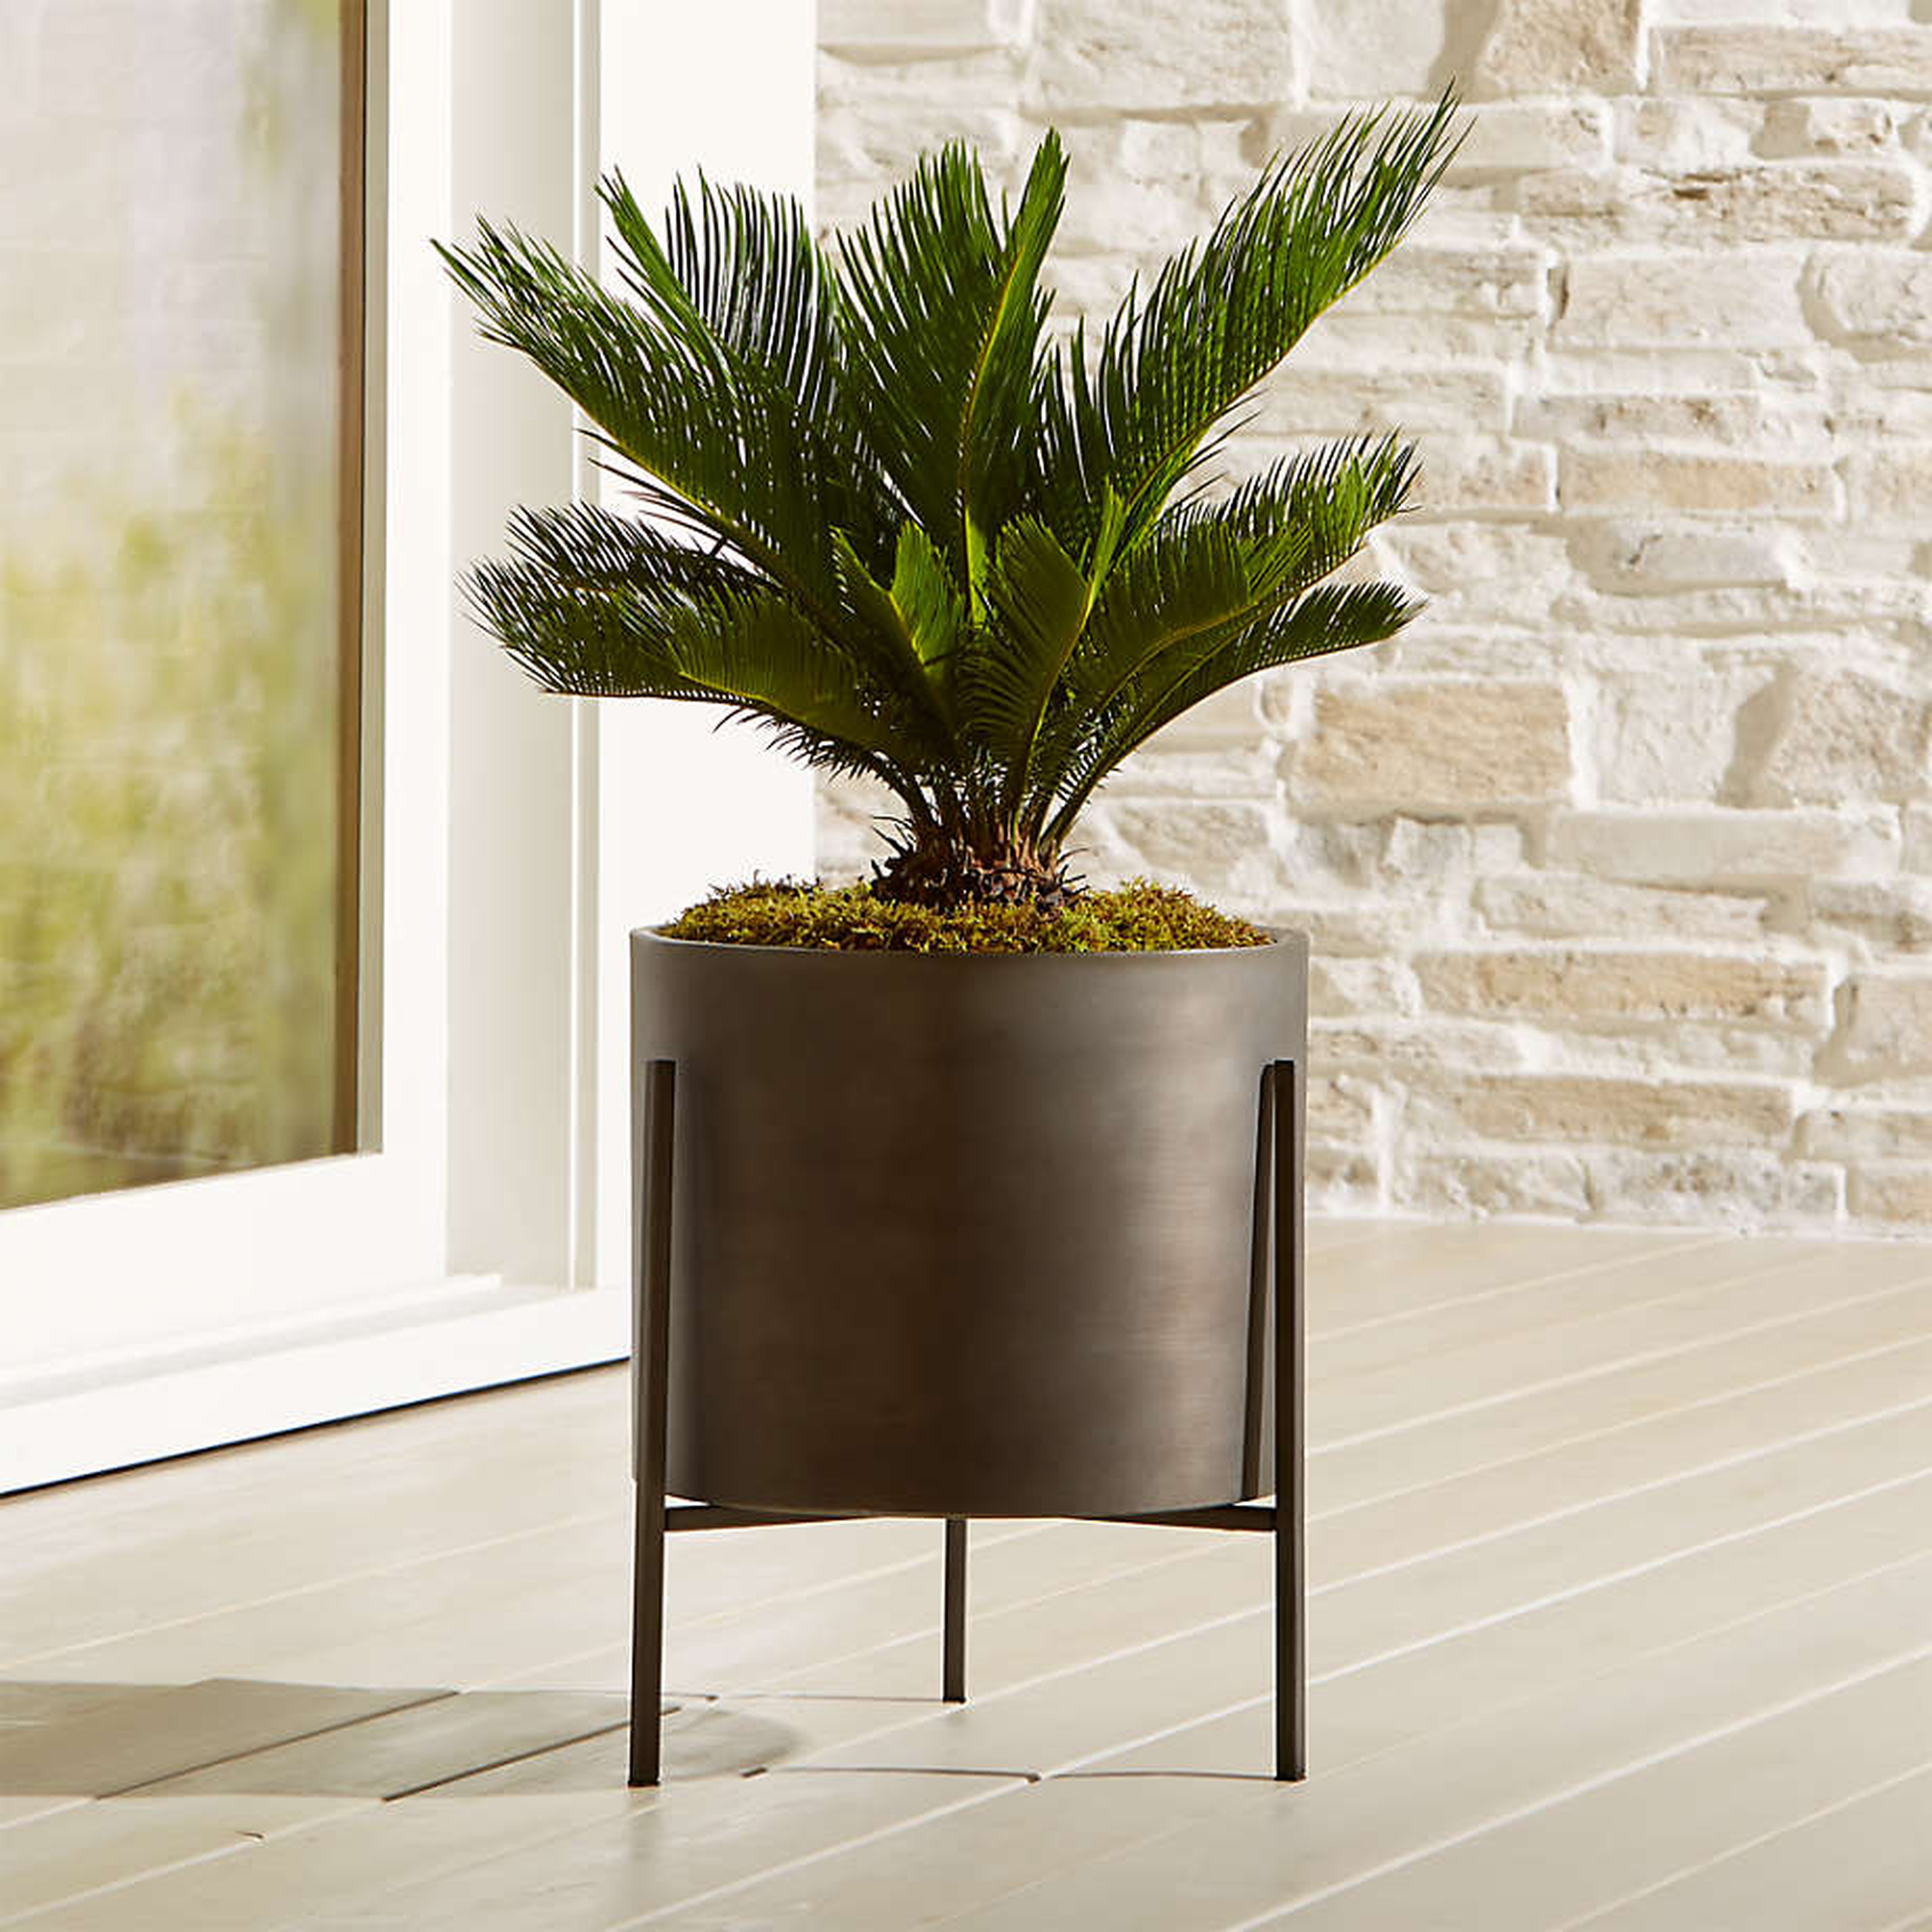 Dundee Low Planter with Stand / BRONZE - Crate and Barrel